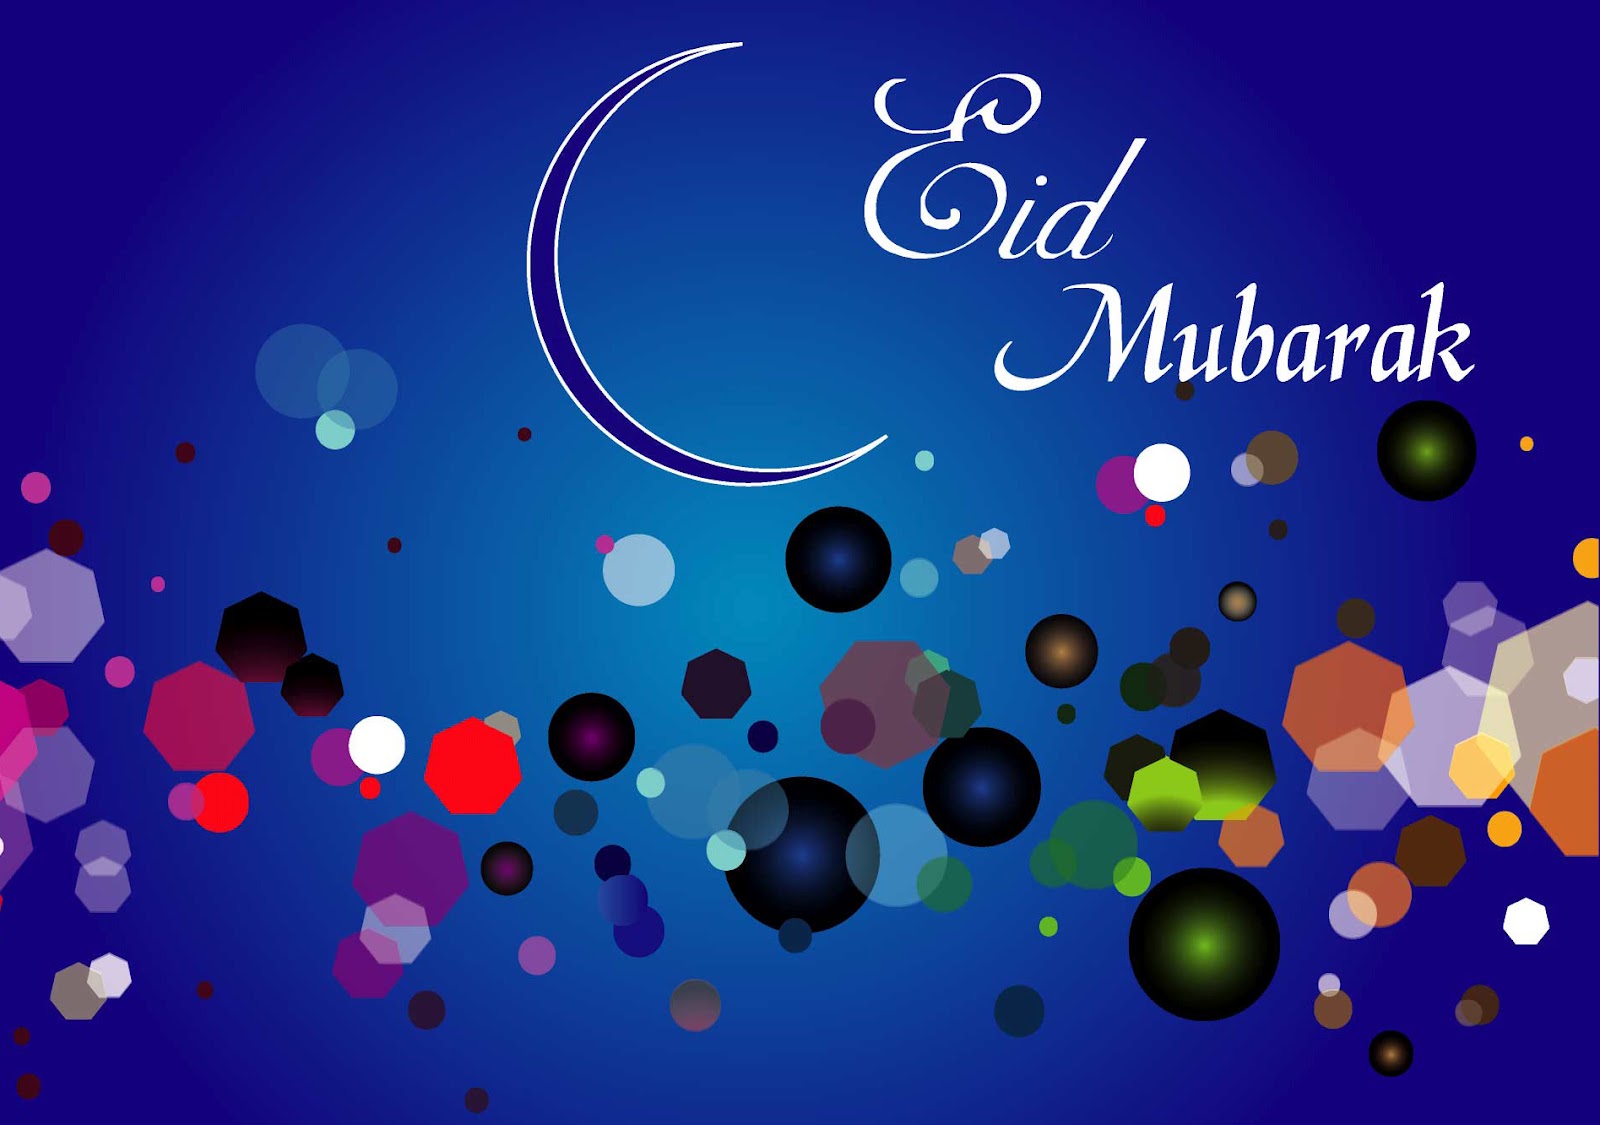 70+ Eid Al Fitr Greeting, Wishes And Eid Mubarak Pictures